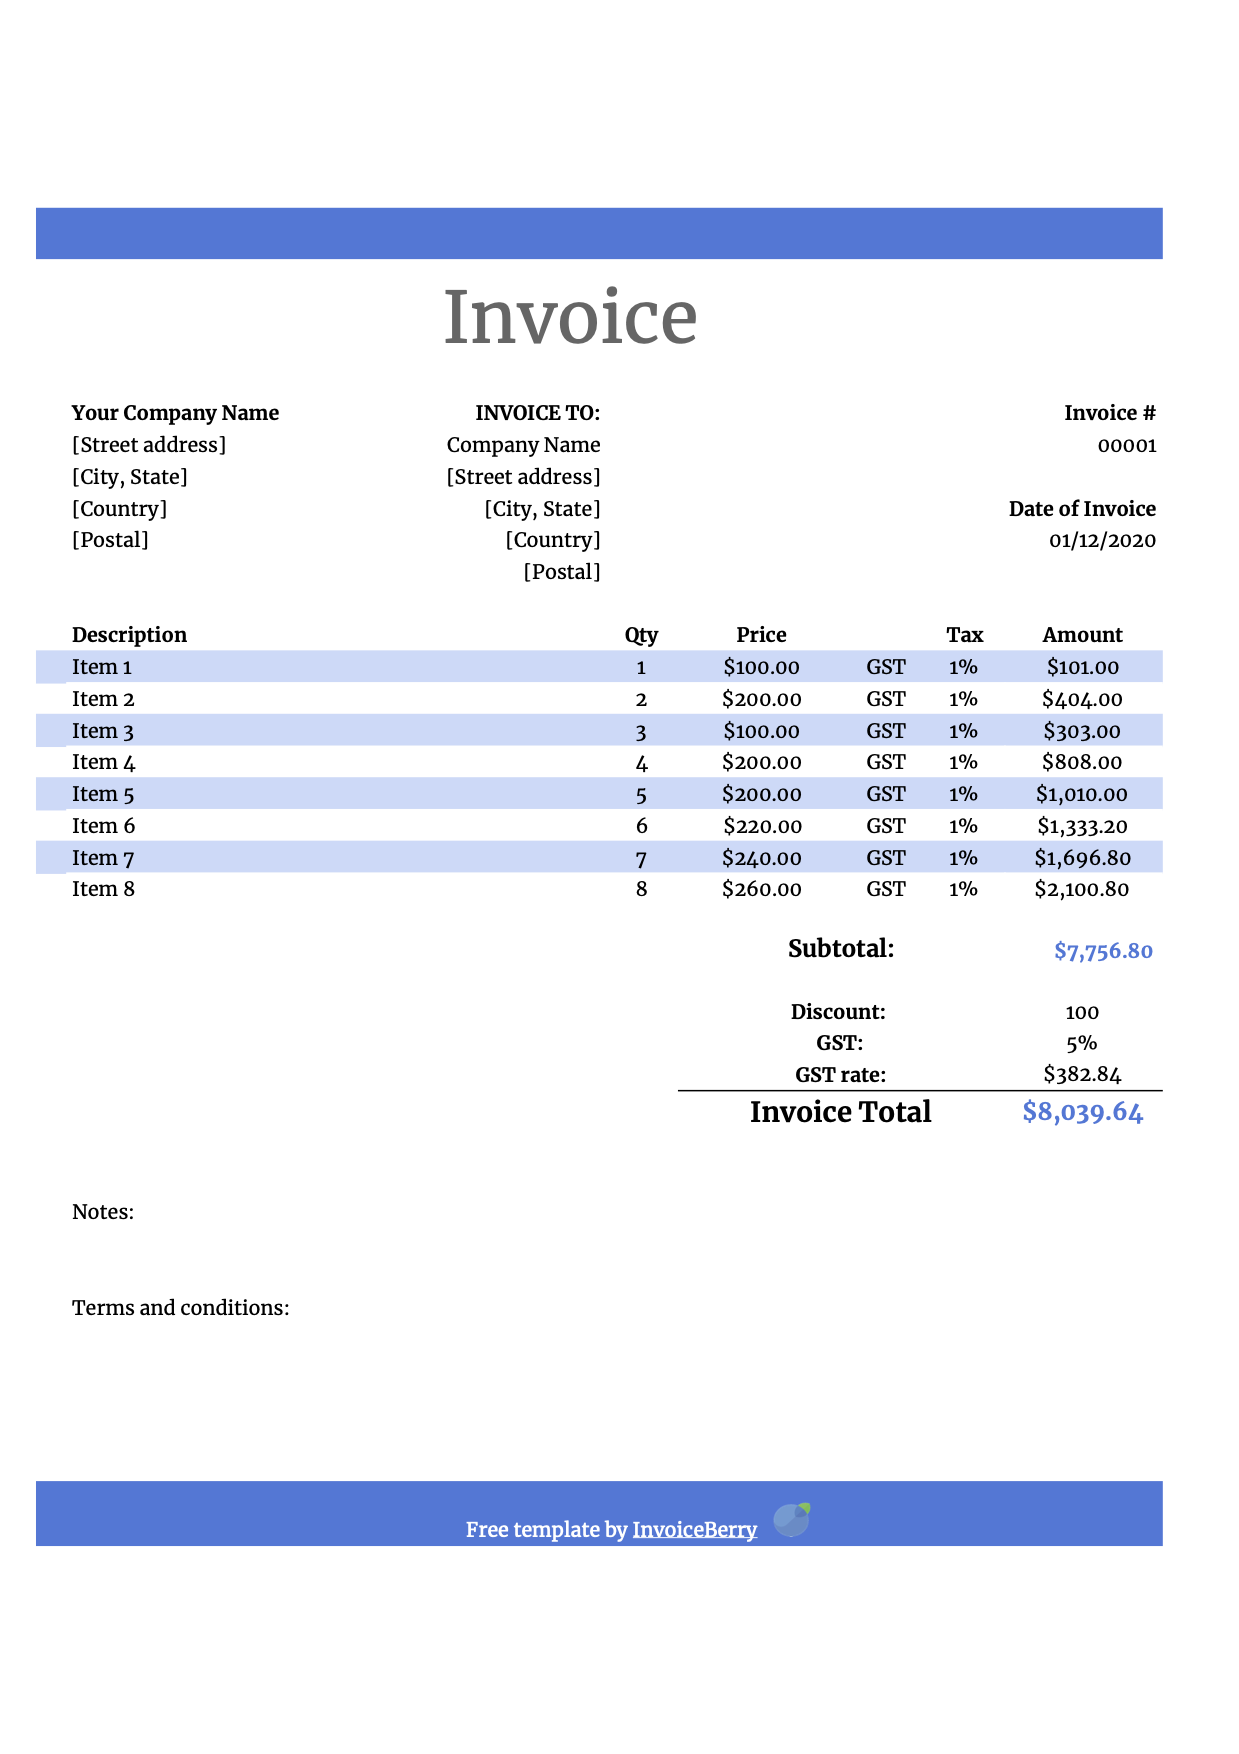 Free Google Drive Invoice Templates: Blank Docs & Sheets Invoices Within Simple Invoice Template Google Docs